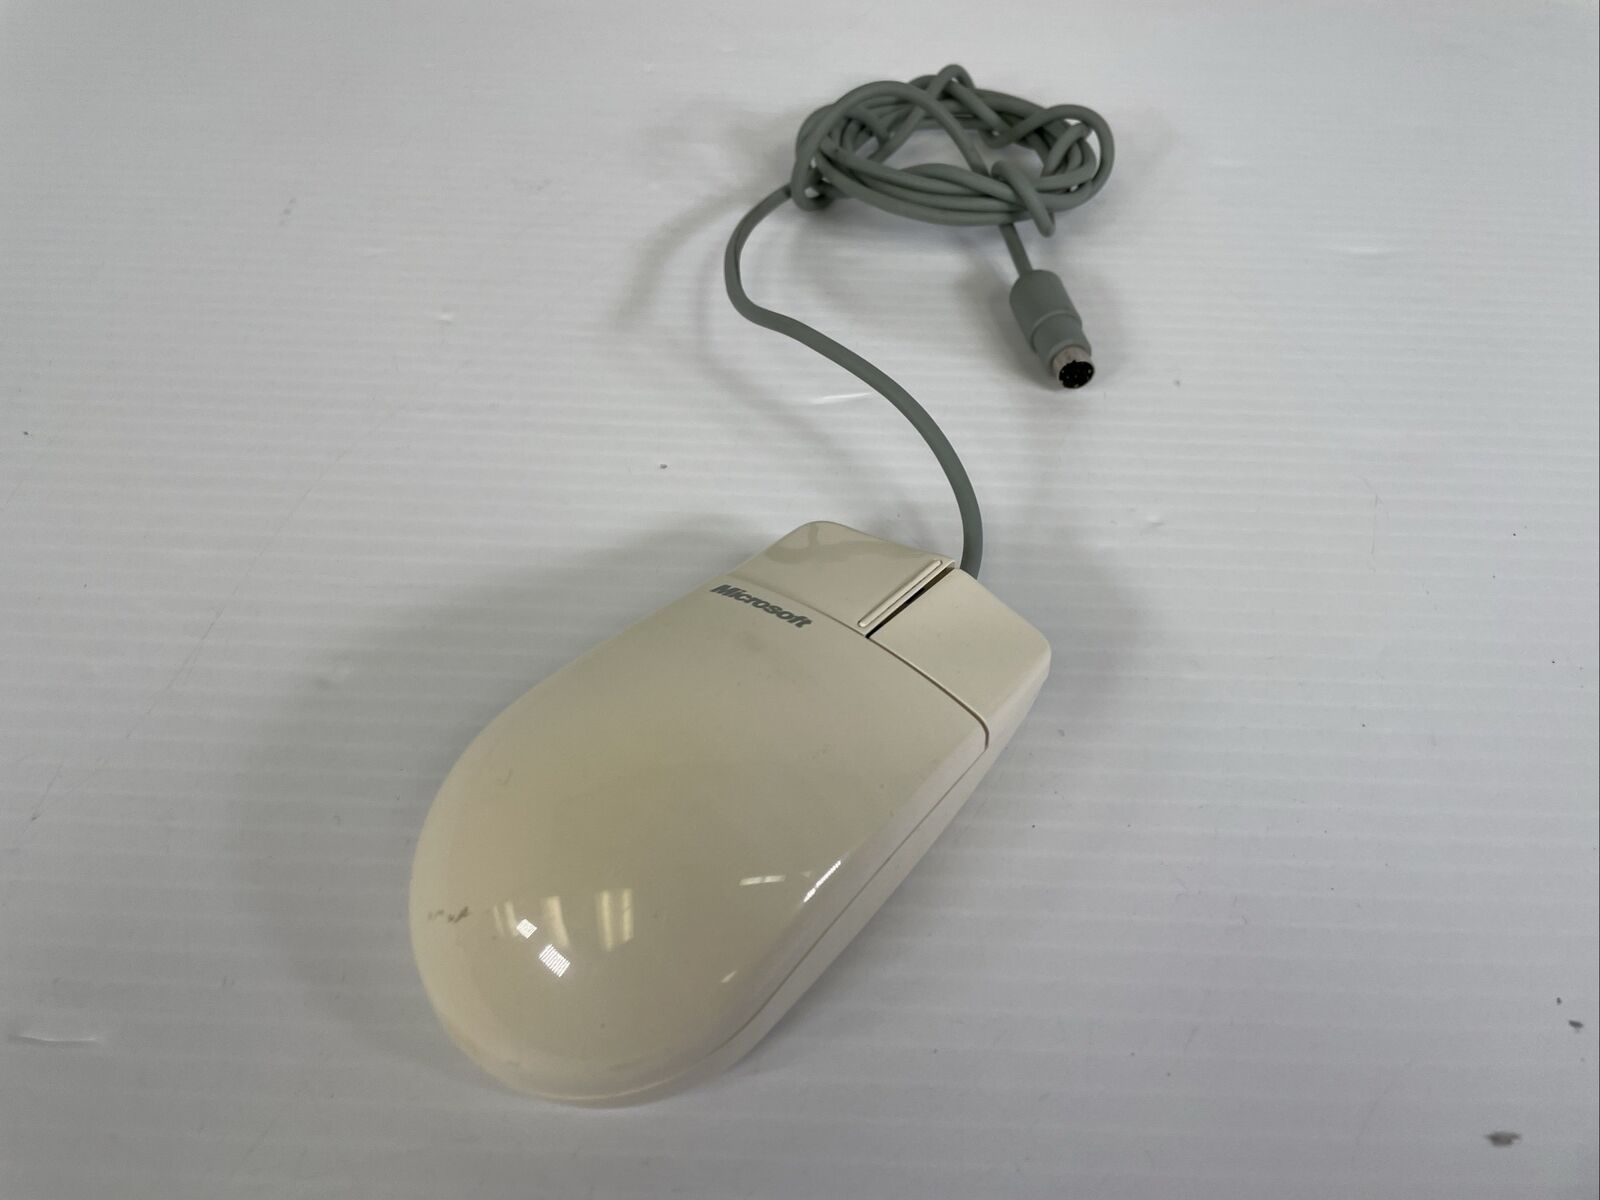 Vintage Microsoft Serial Mouse 2.0A Part Number 58269 - Working